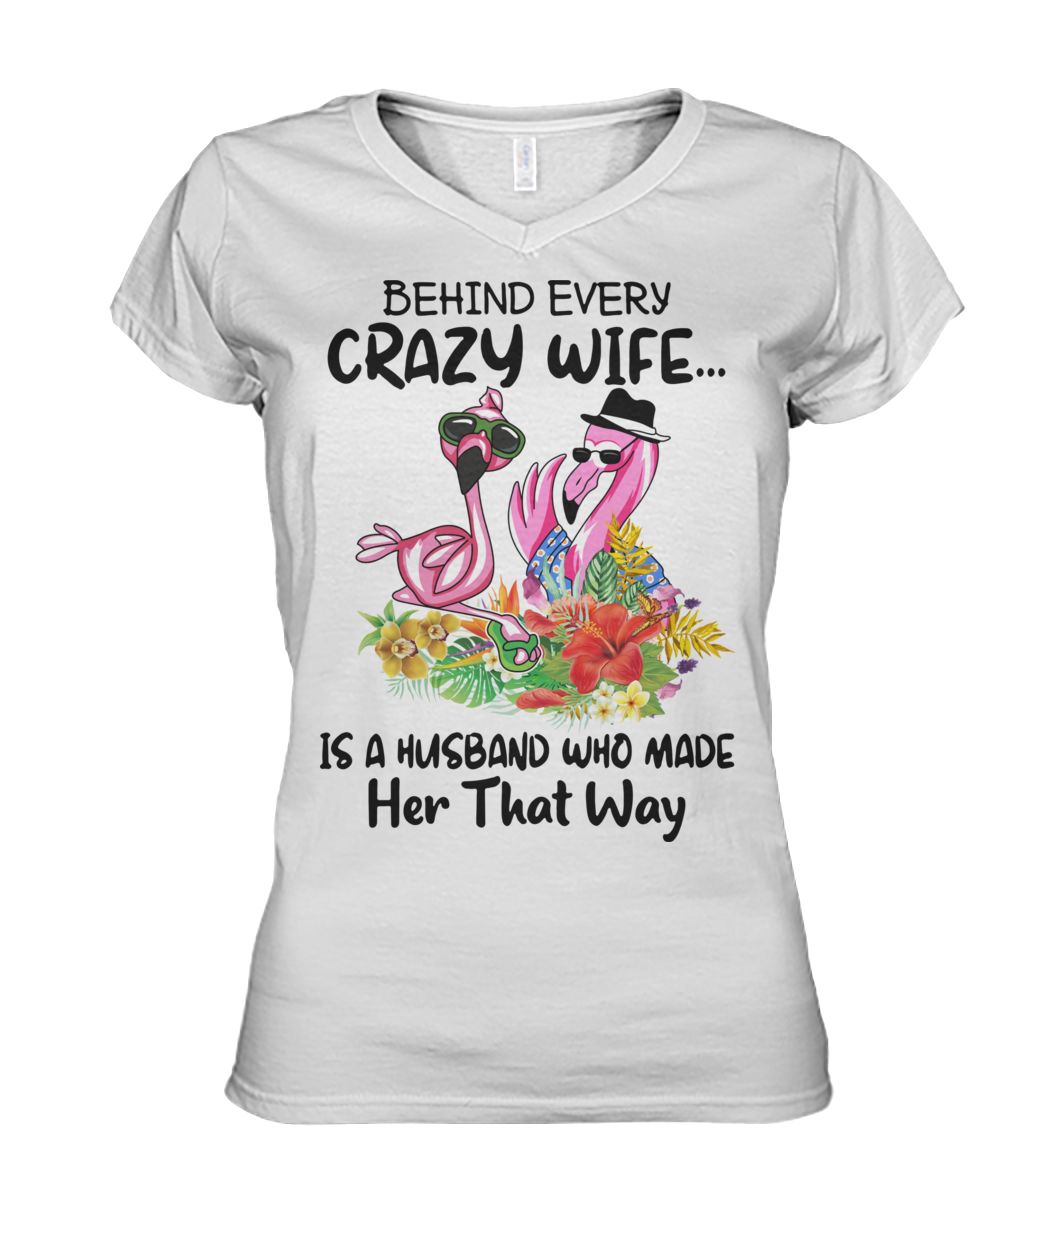 Flamingo behind every crazy wife is a husband who made her that way women's v-neck